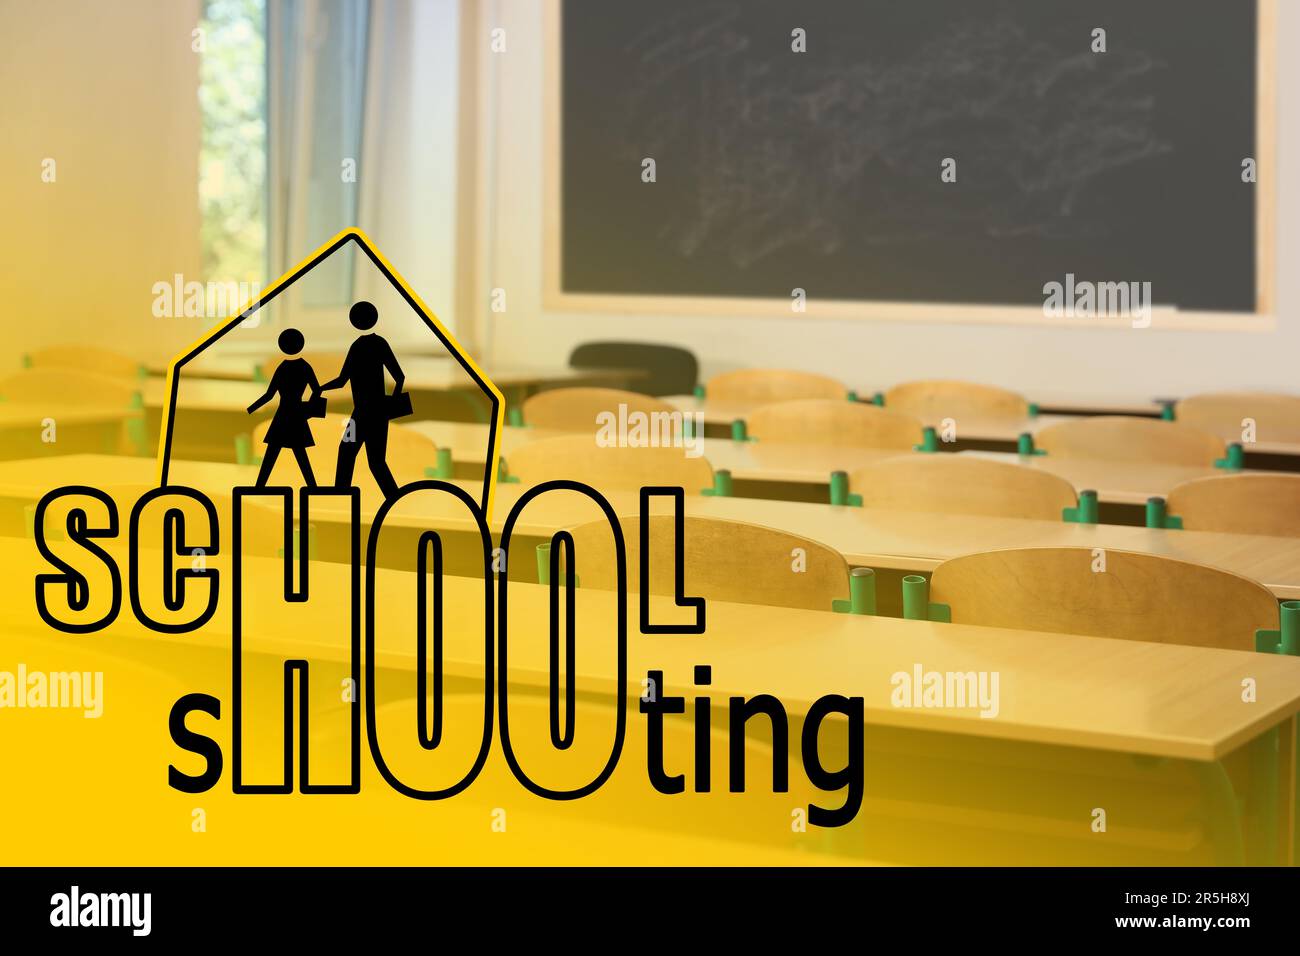 School shooting. Phrase with traffic sign against classroom Stock Photo